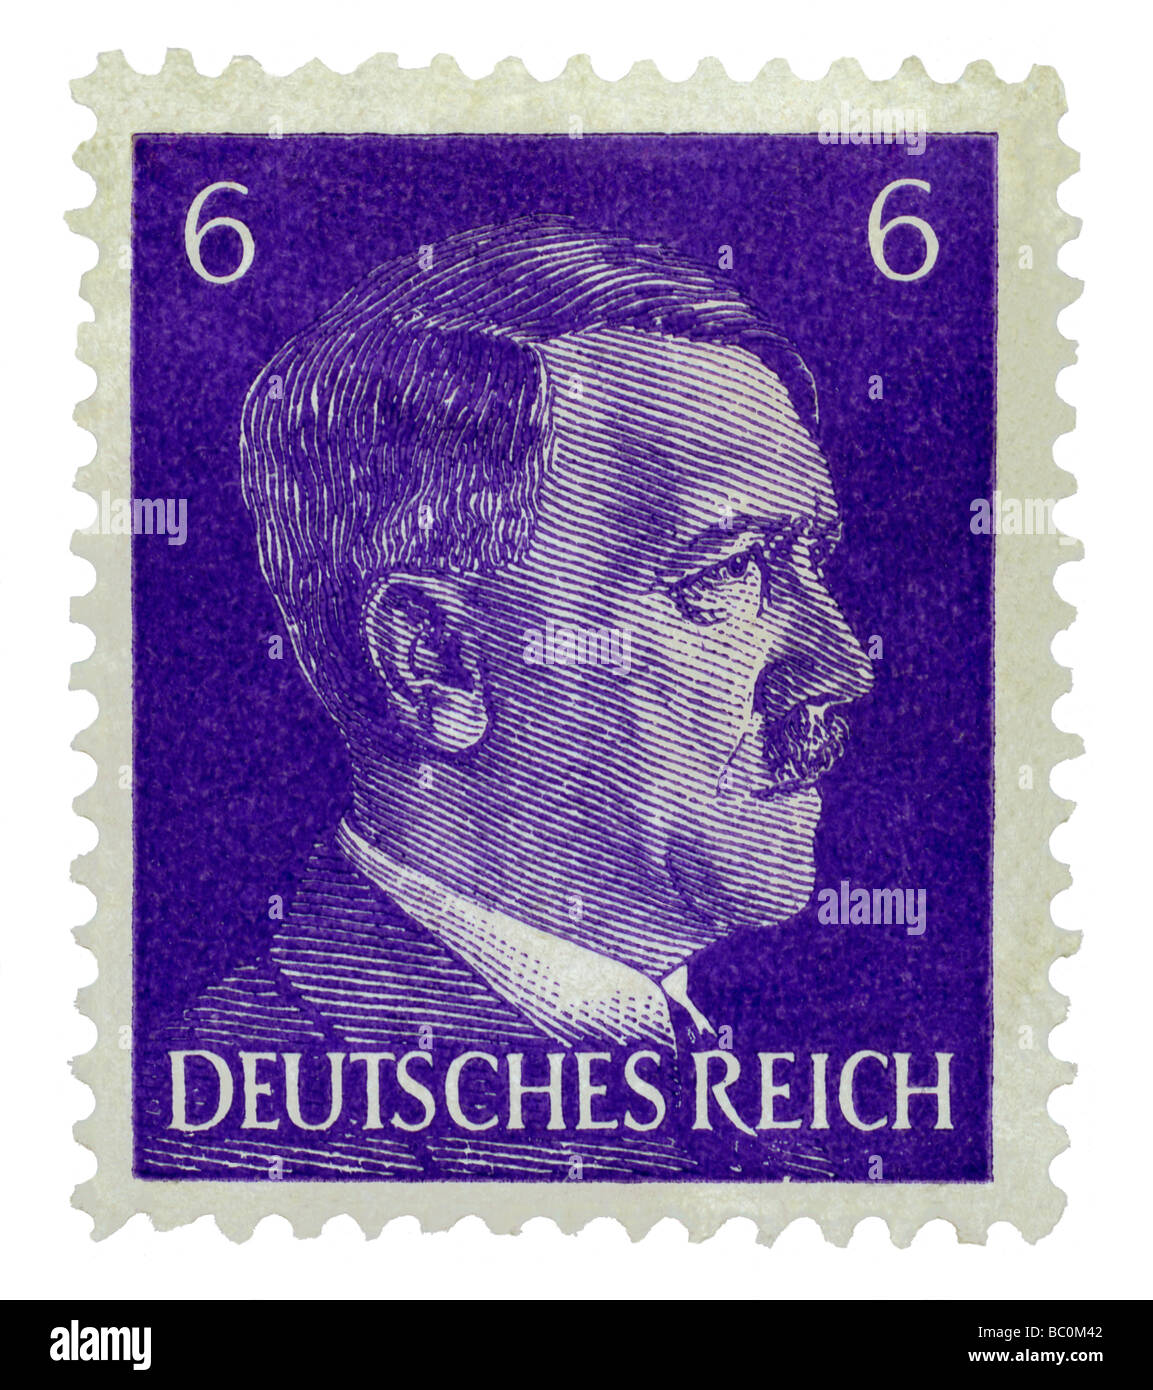 Old German postage stamp with portrait of Adolf Hitler Stock Photo